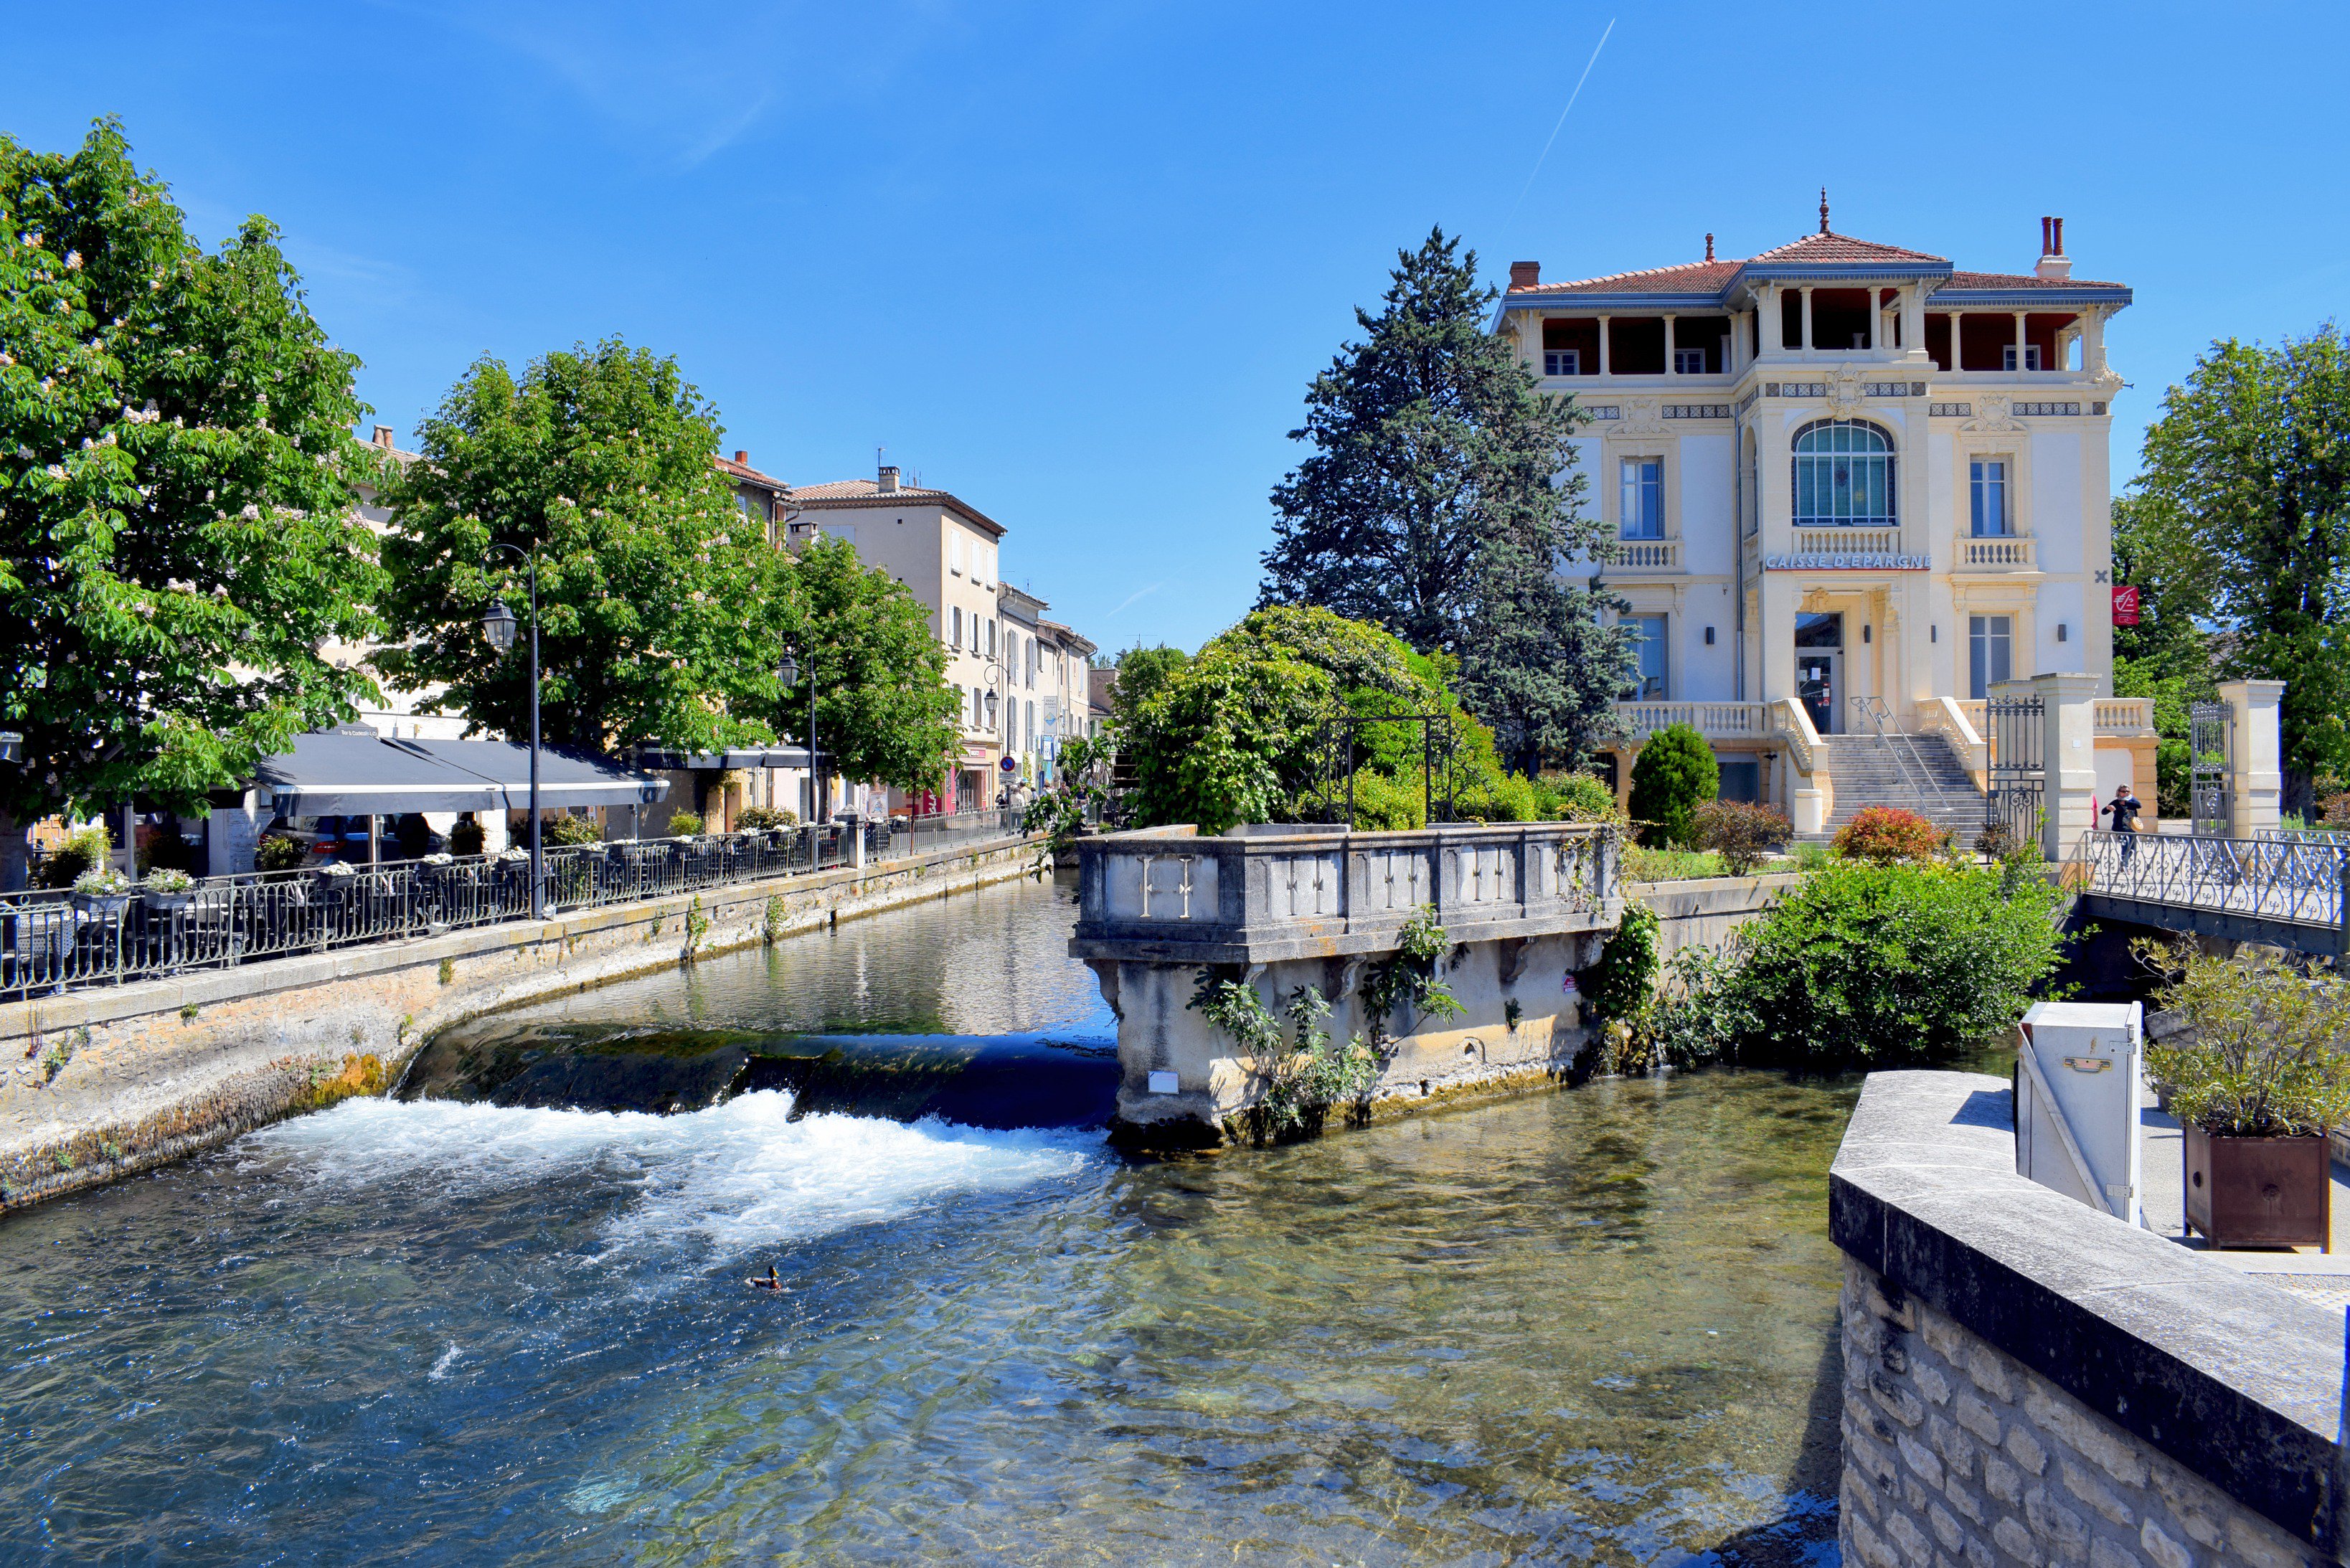 Fontaine-de-Vaucluse in Provence: What to See and Do - French Moments